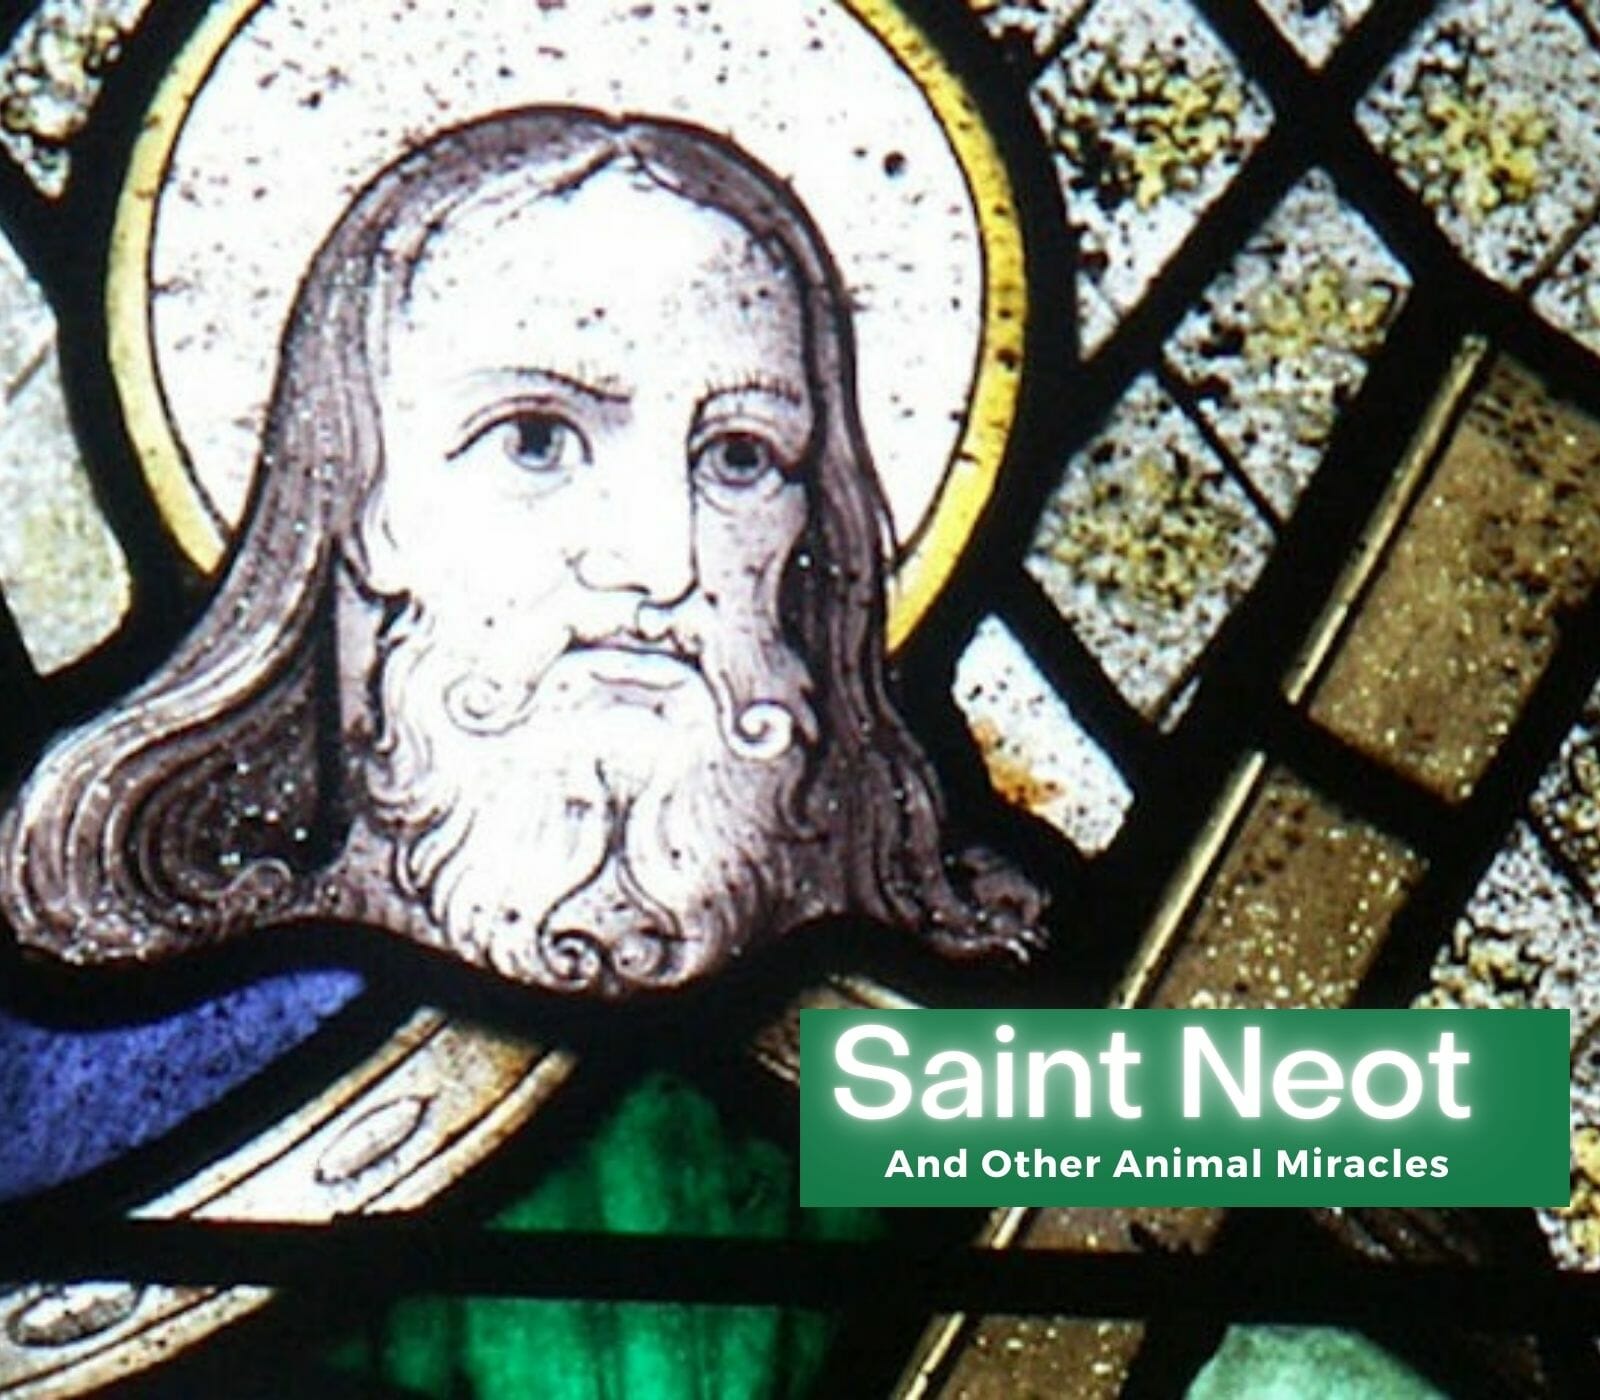 Saint Neot and His Animal Miracles